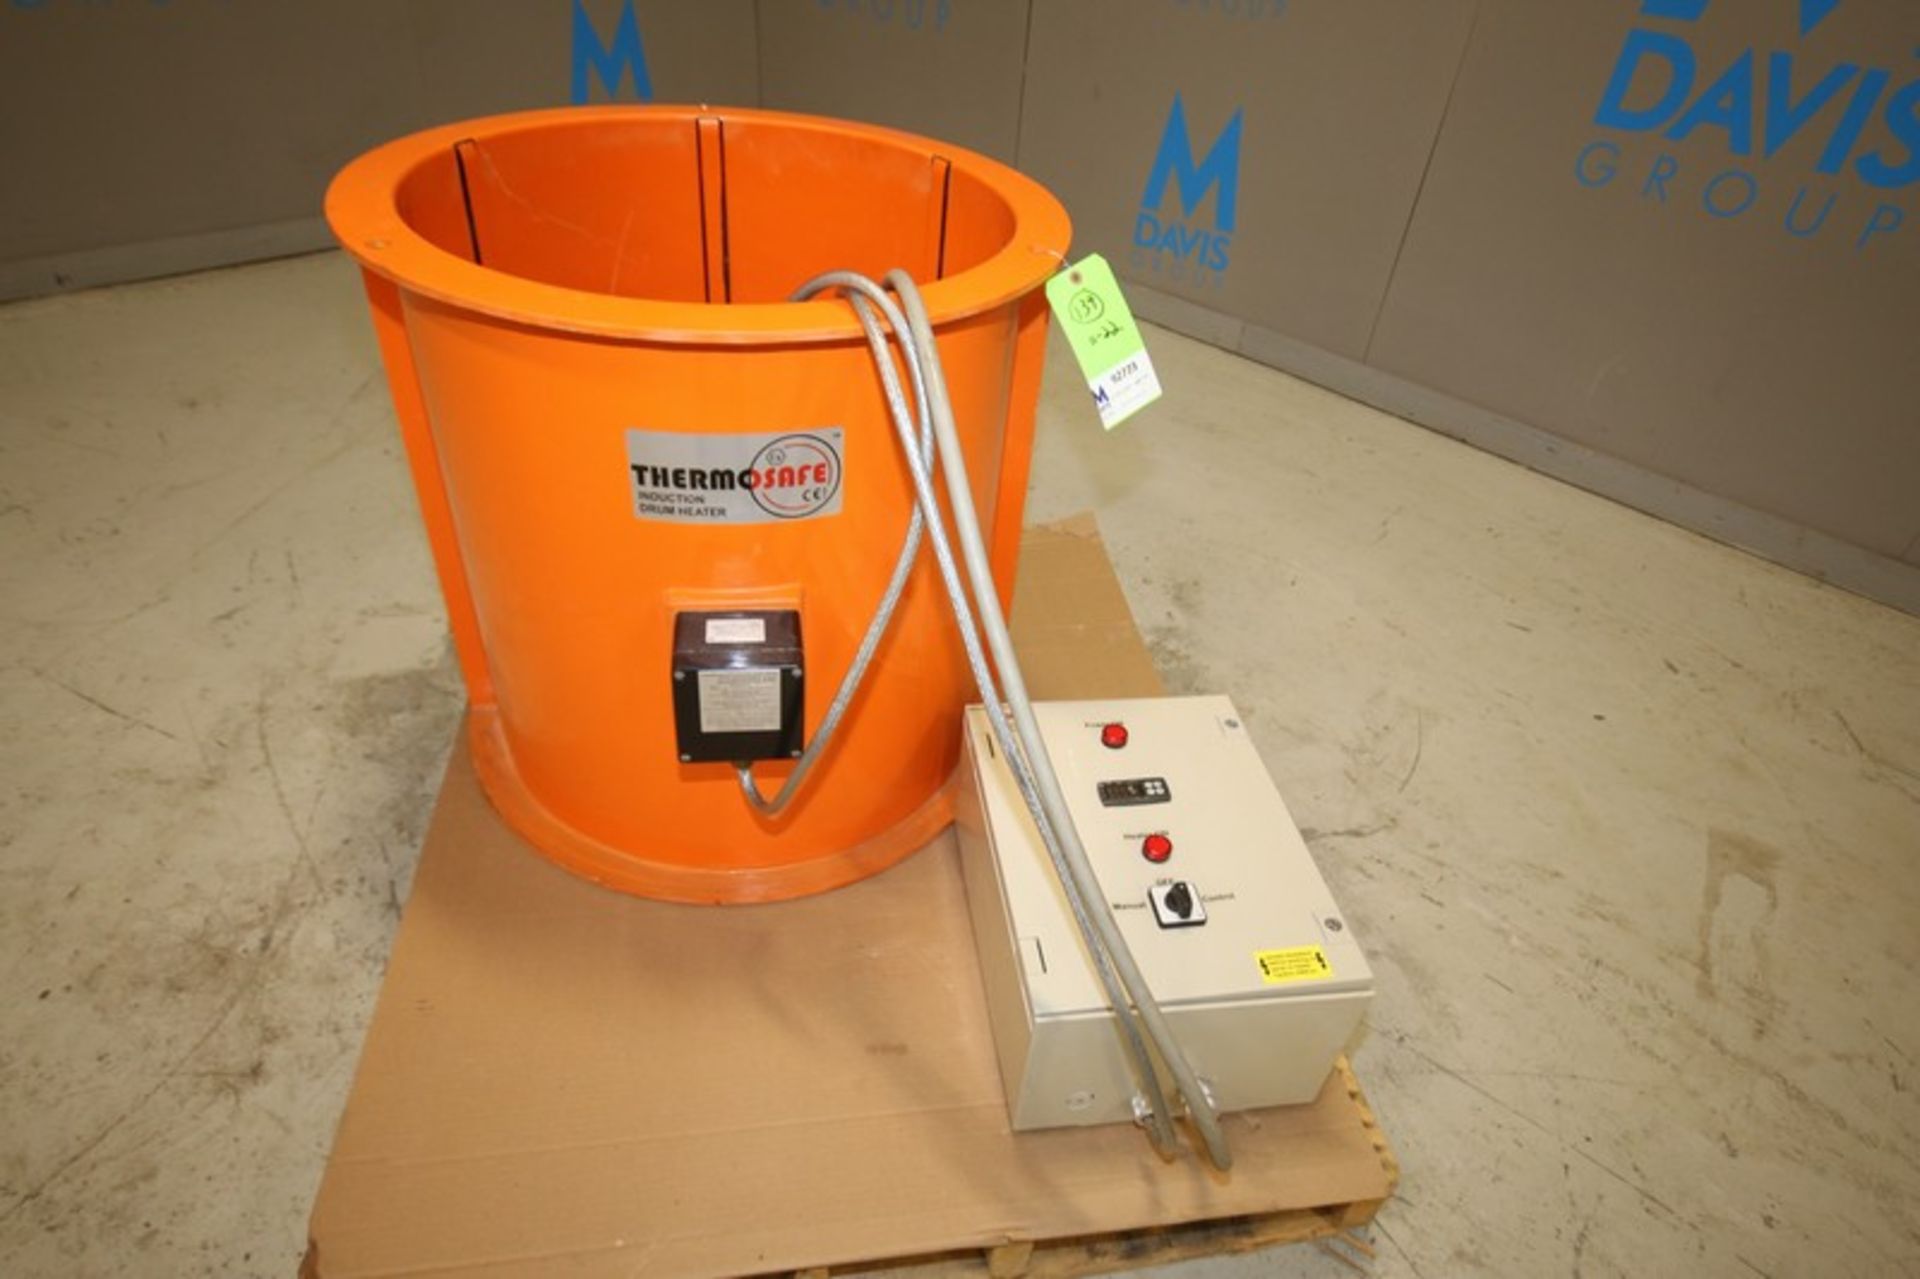 Thermo Safe Induction Drum Heater SN 2894, with Controller, 240V (INV#92773) (Located @ the MDG